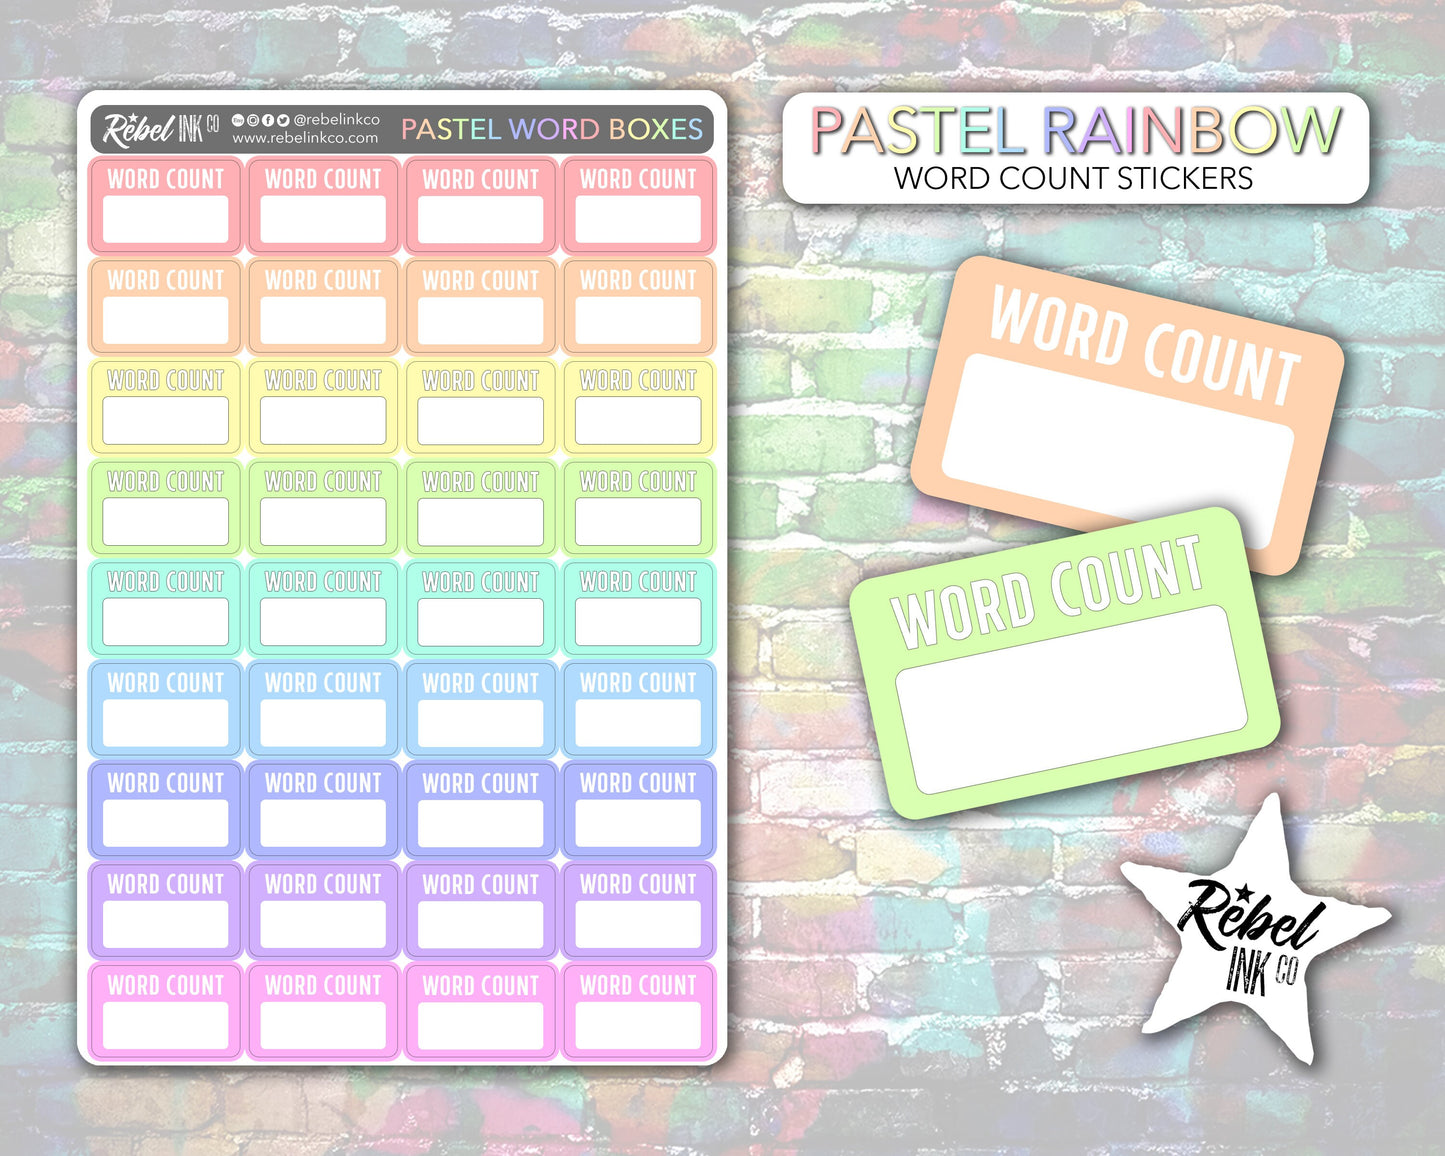 Word Count Stickers - Pastel Rainbow